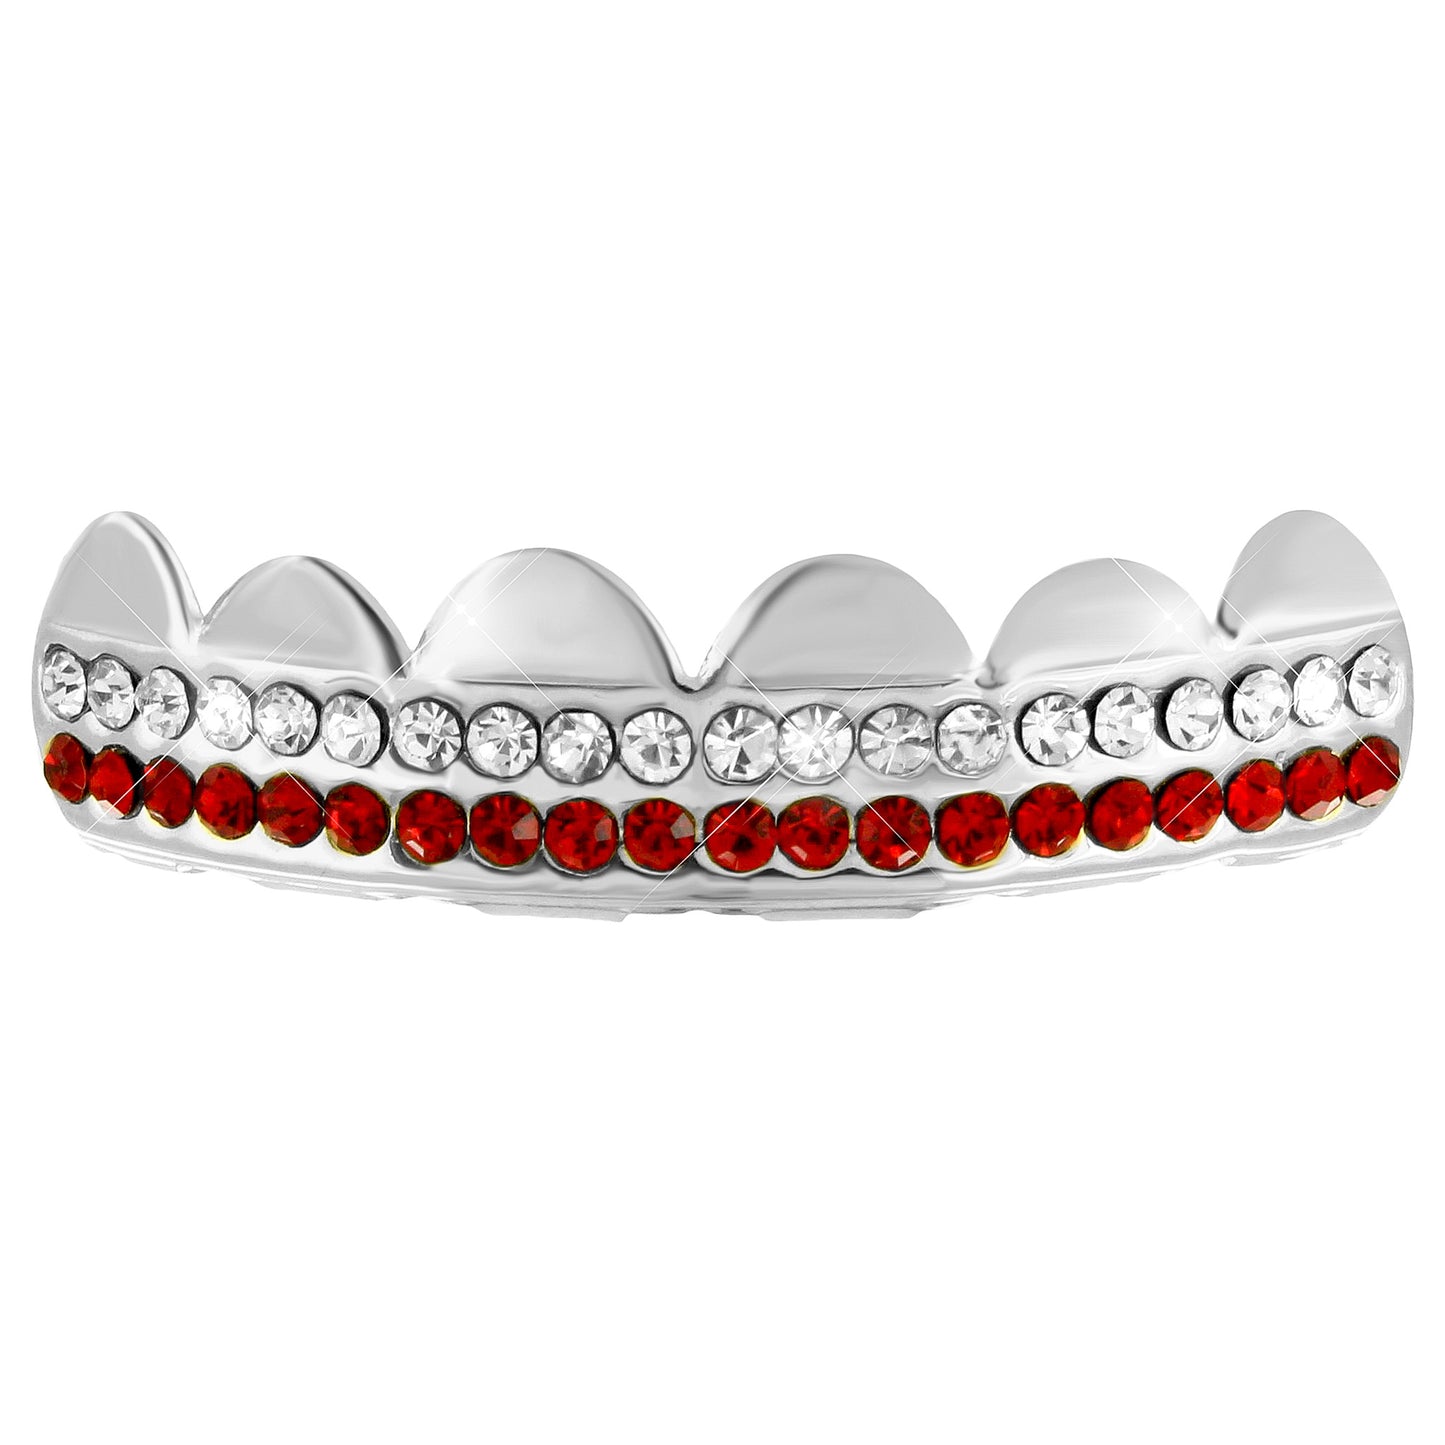 2 Row  Top Grillz 14k White Gold Finish